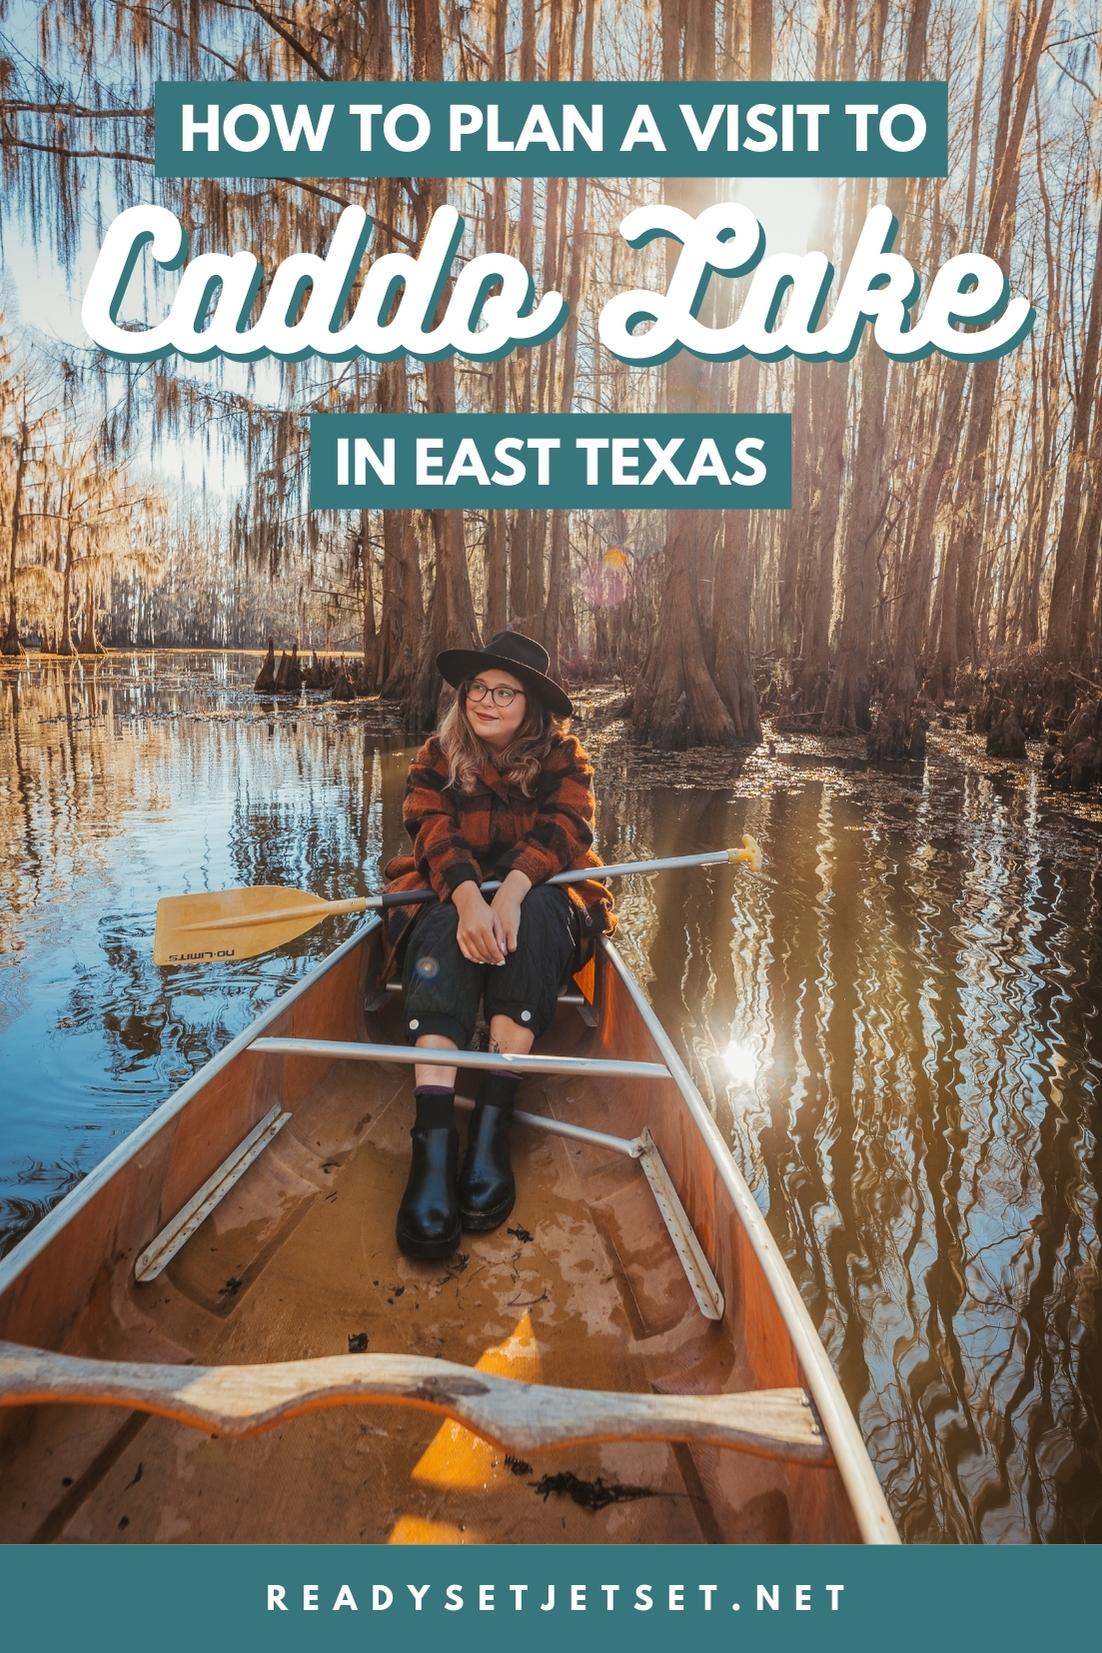 The Quick Guide to Caddo Lake in East Texas